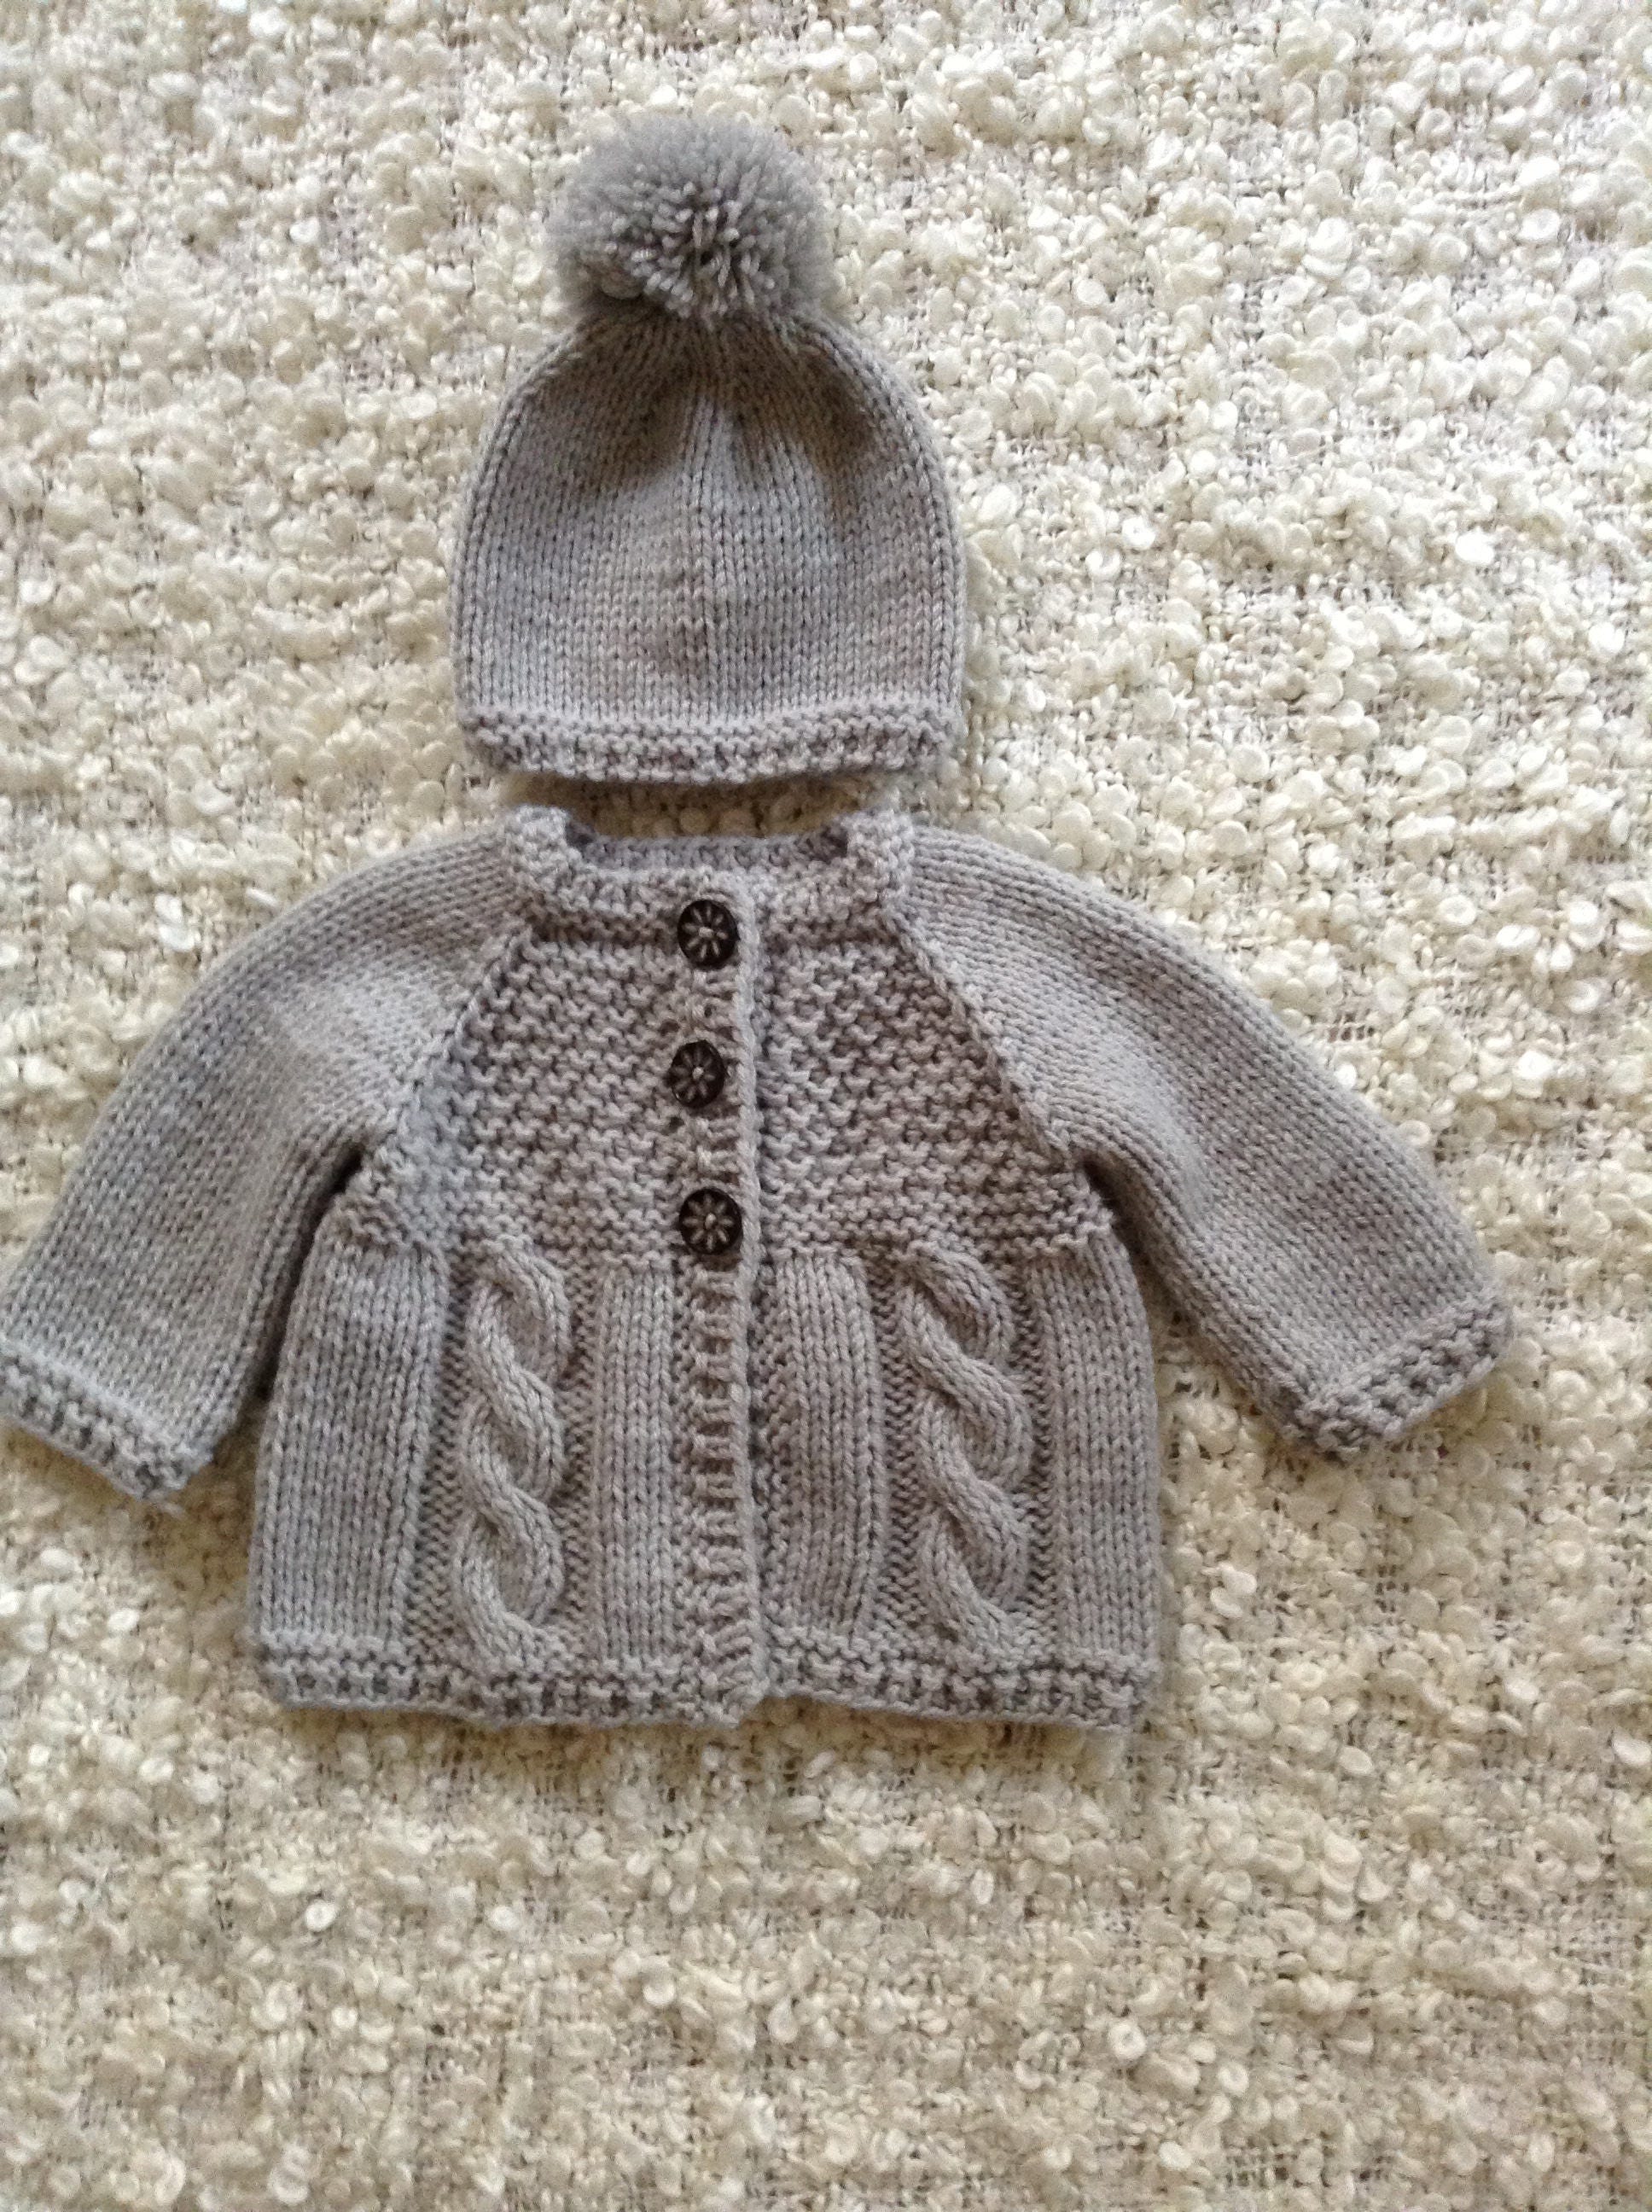 EXPRESS SHIPPING Knit Baby Grey Baby Girl Sweater and Hat | Etsy